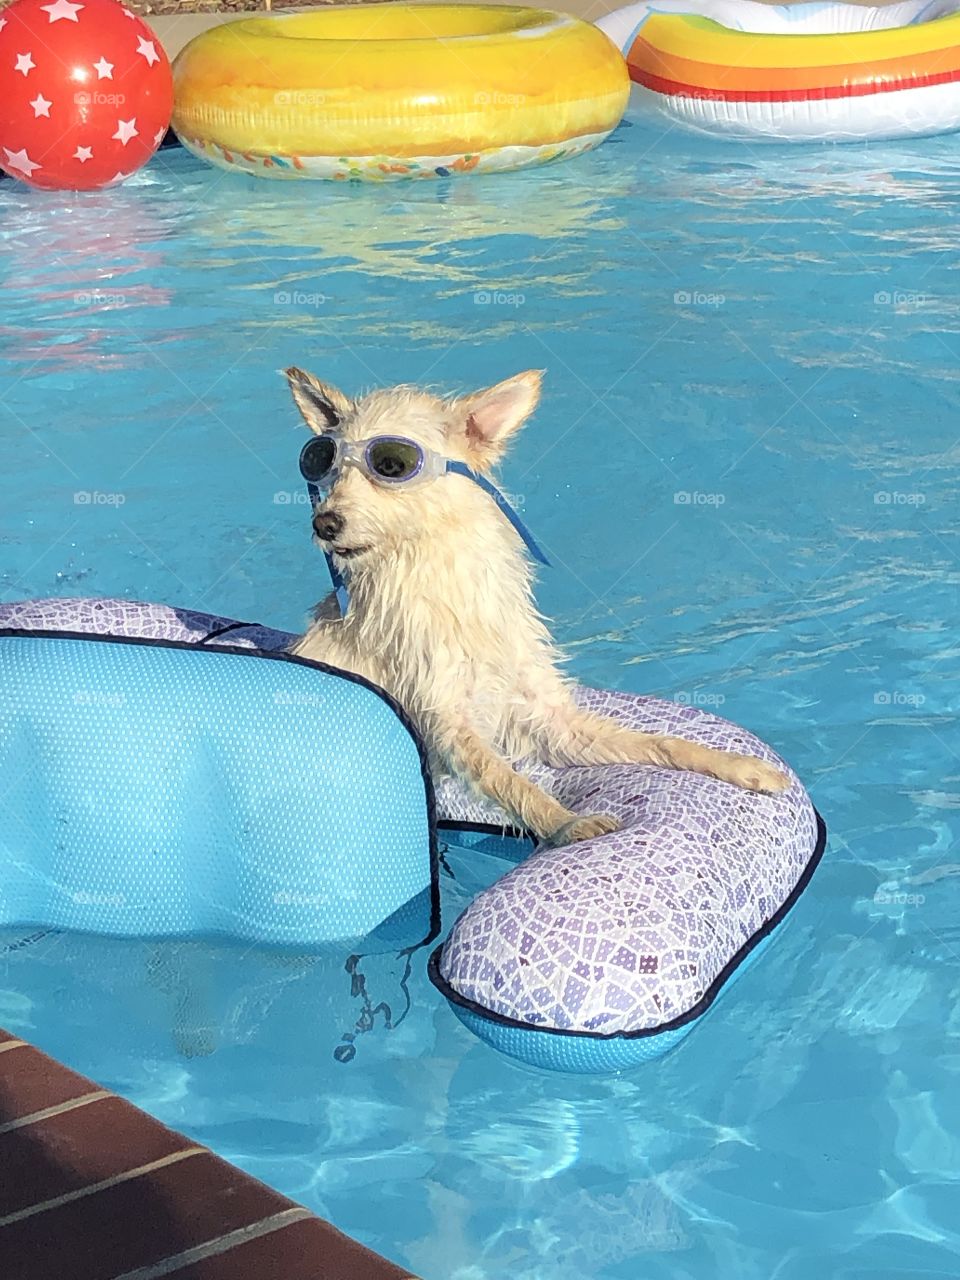 A cute and adorable puppy dog wearing swimming goggles hangs out in the pool during a bbq.